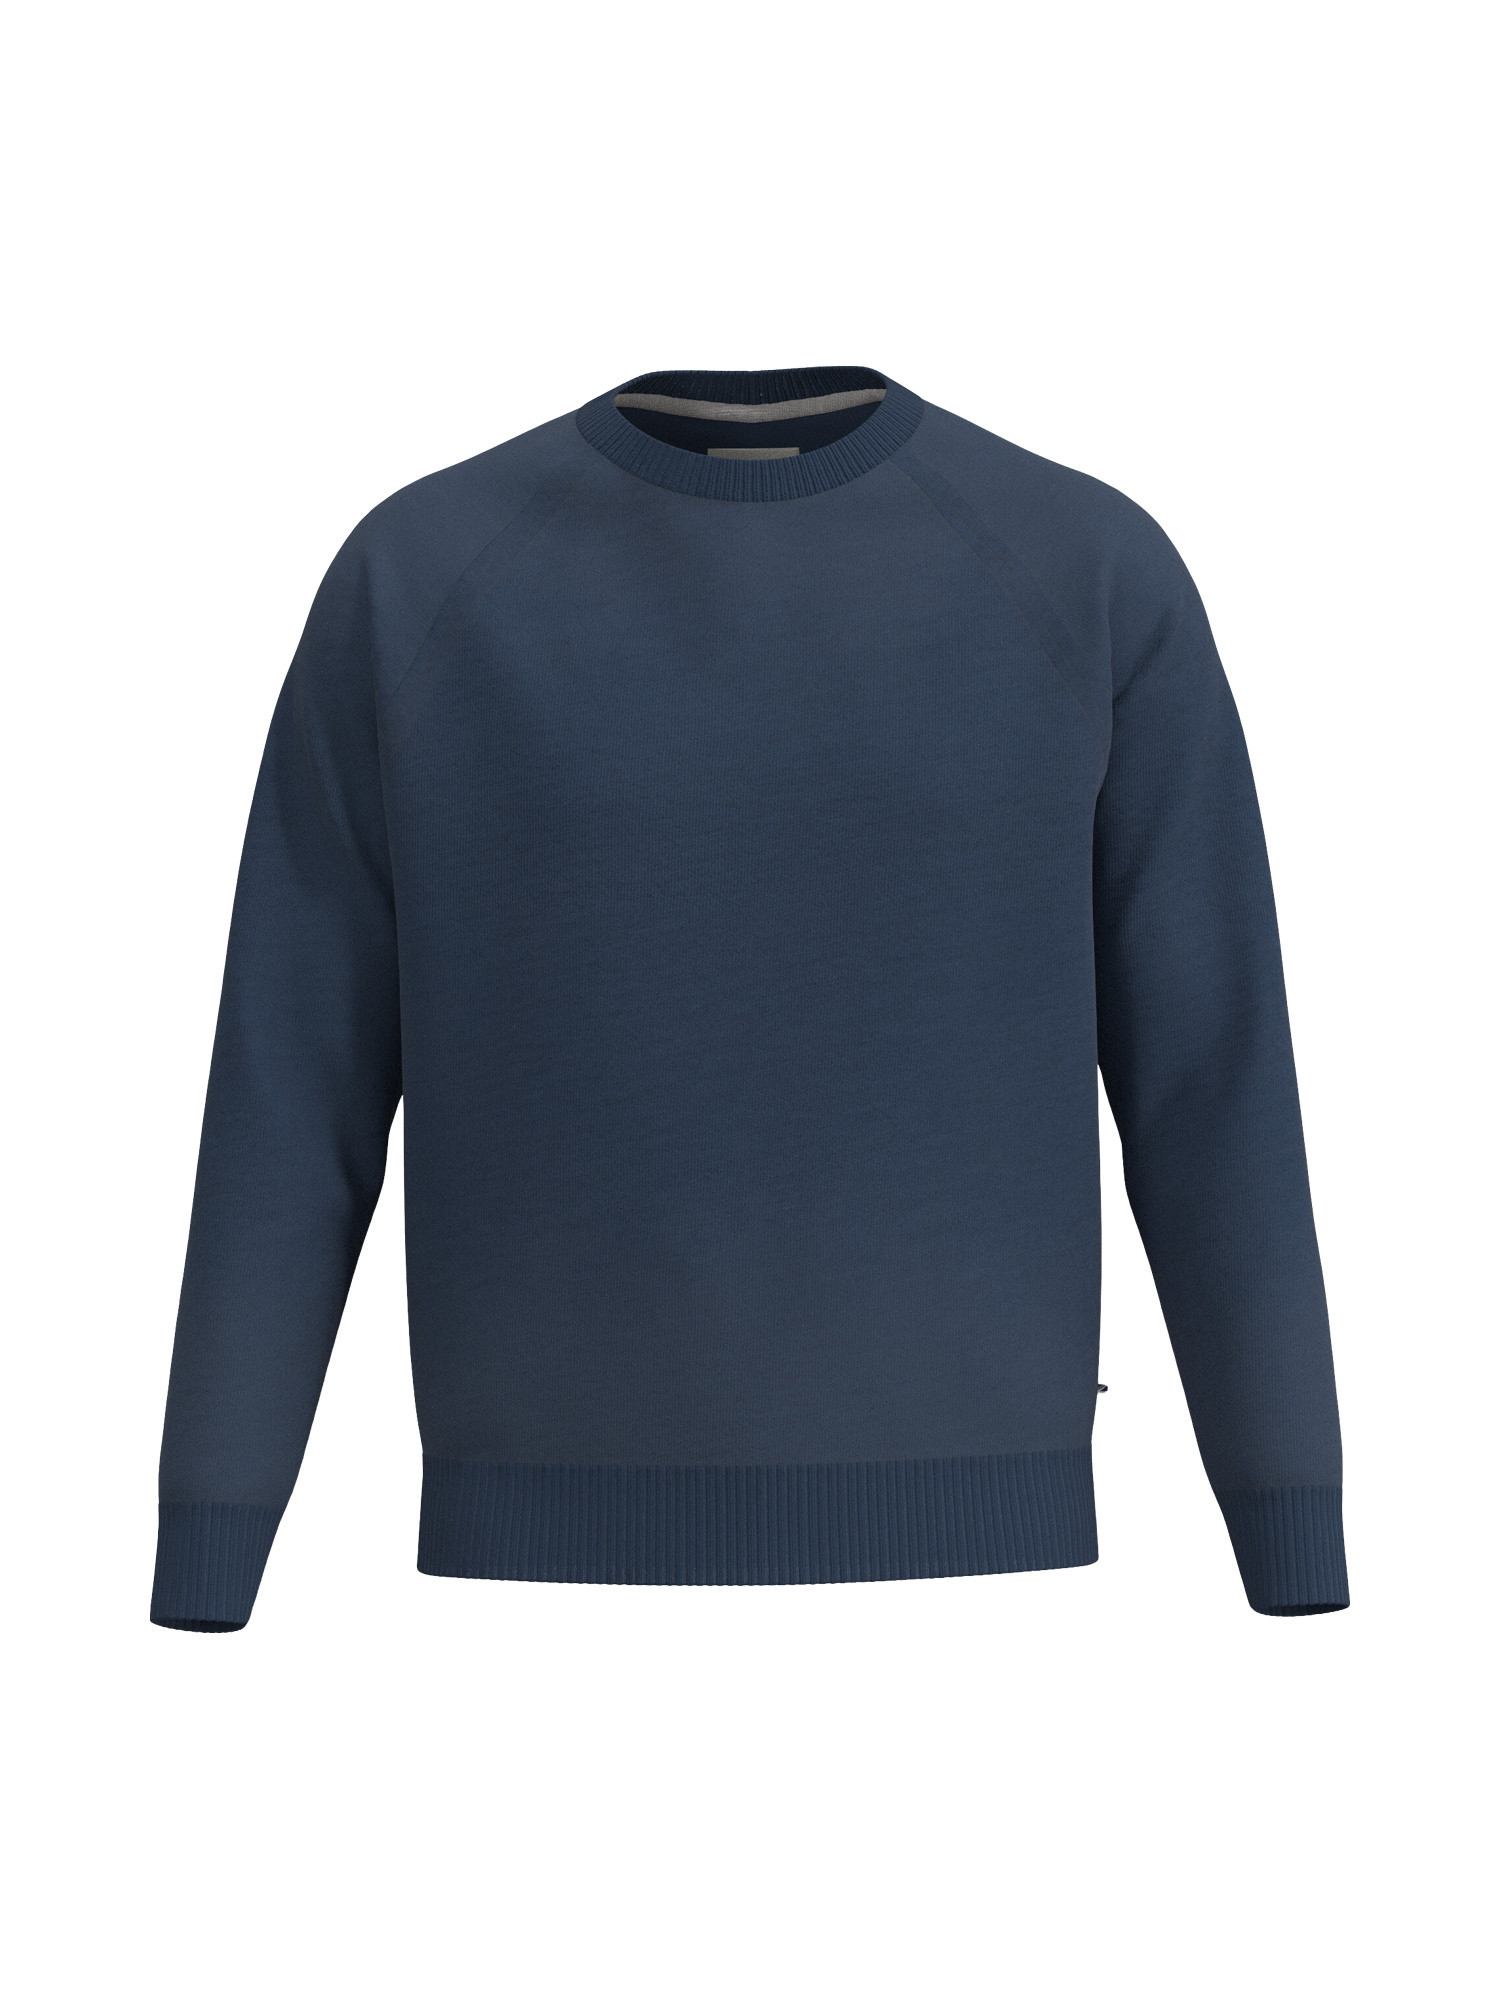 Pepe Jeans - Pullover girocollo in cotone, Blu scuro, large image number 0